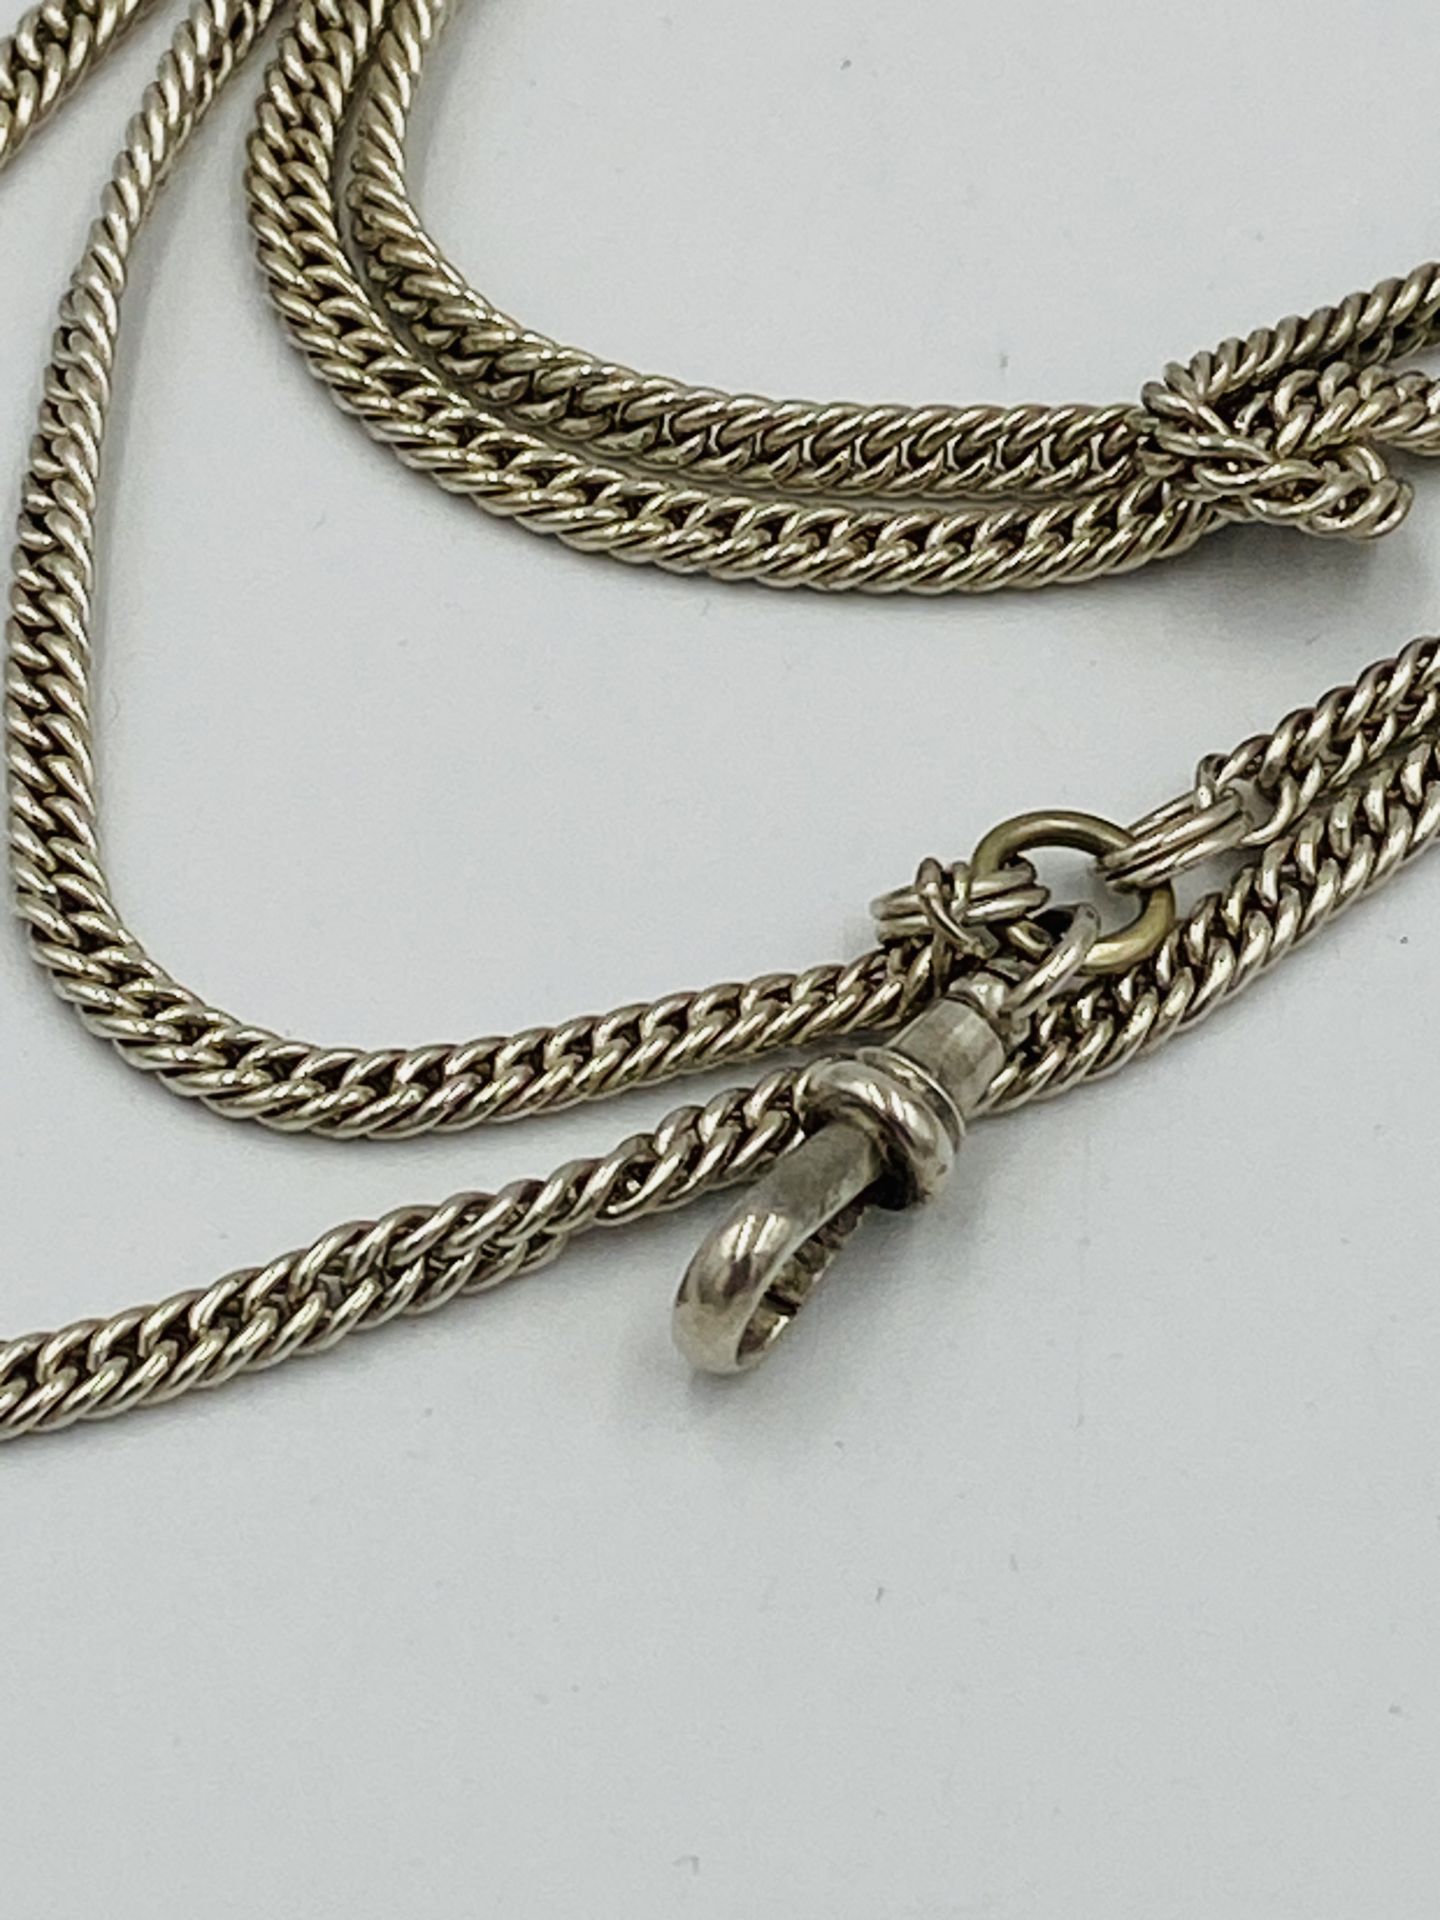 Silver muff chain - Image 3 of 3